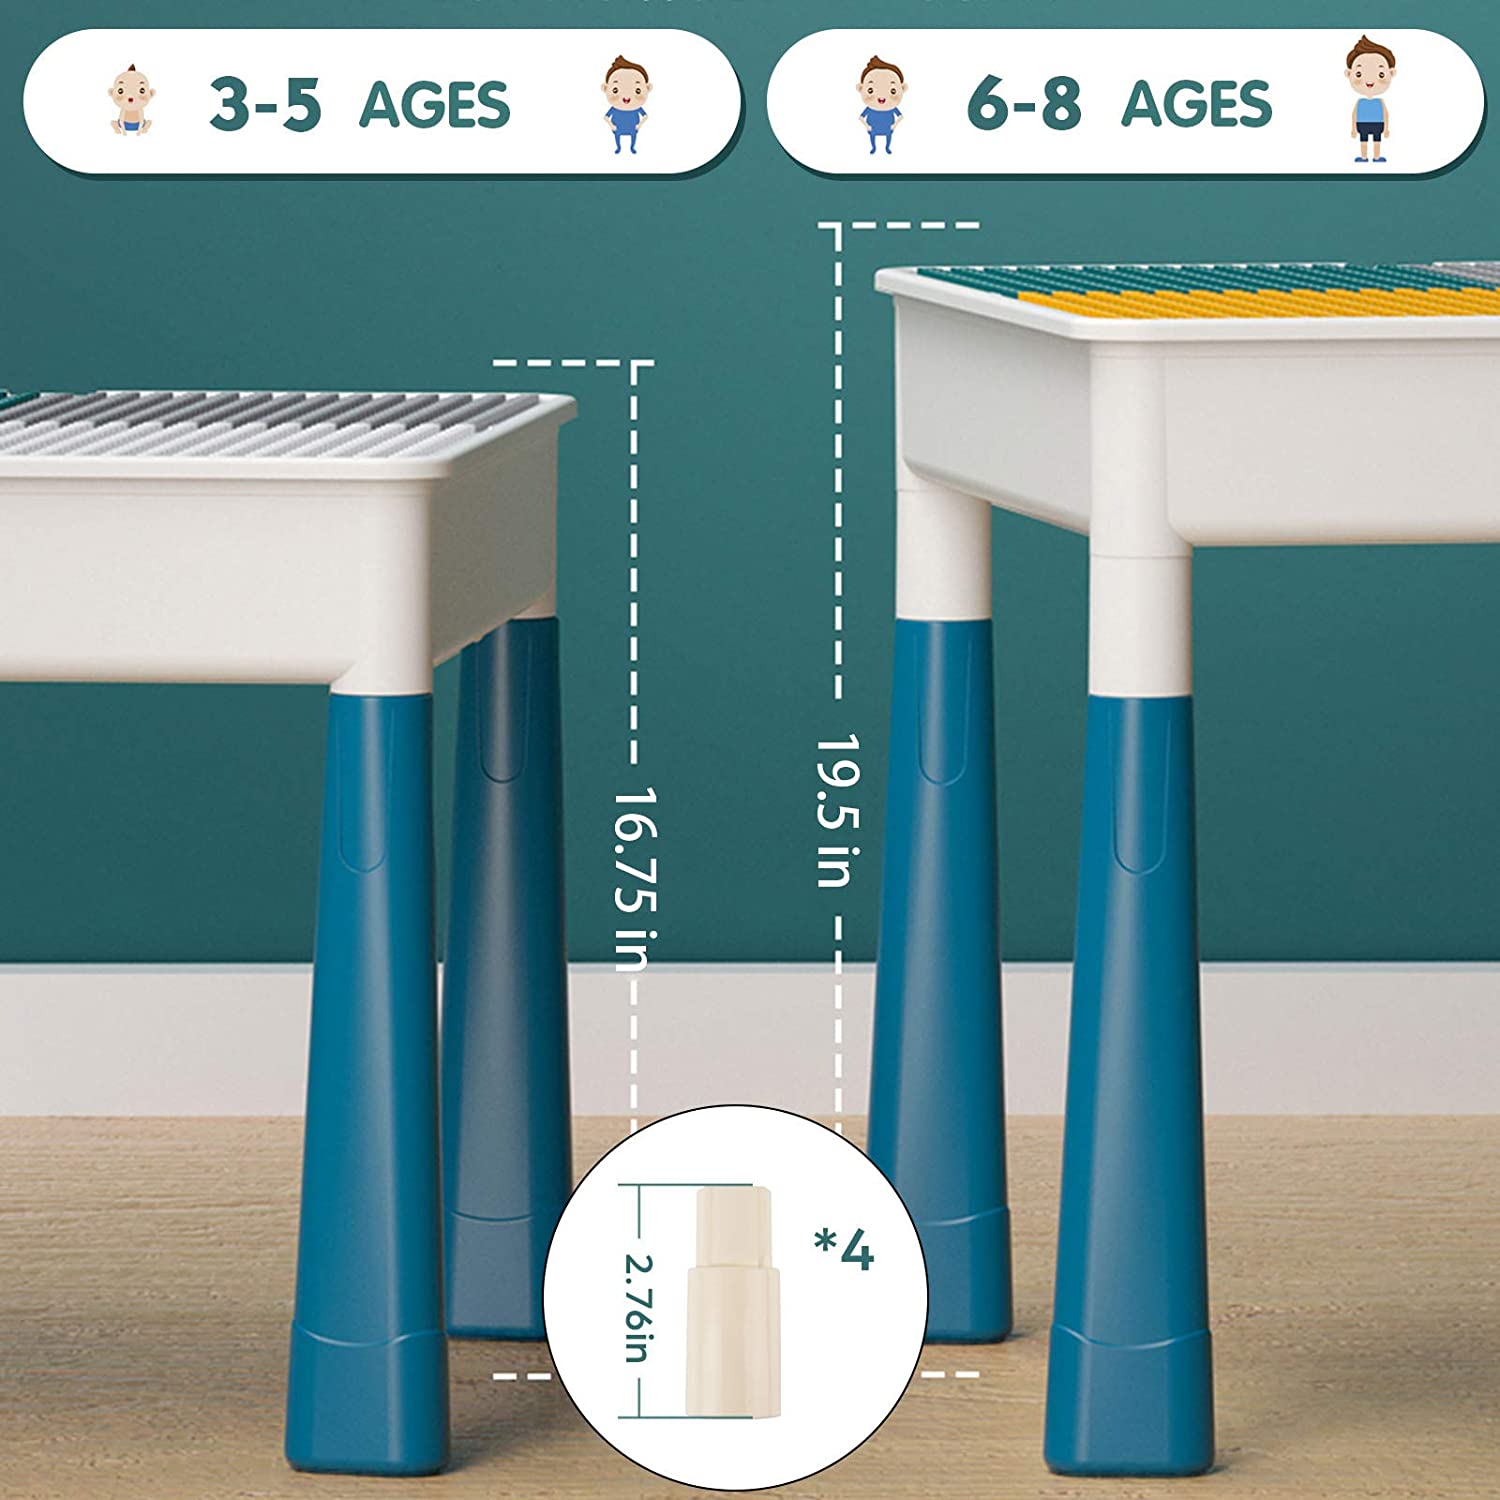 Household Blocks Table with Storage and Chair for Kids Ages 4-8 years - 0 